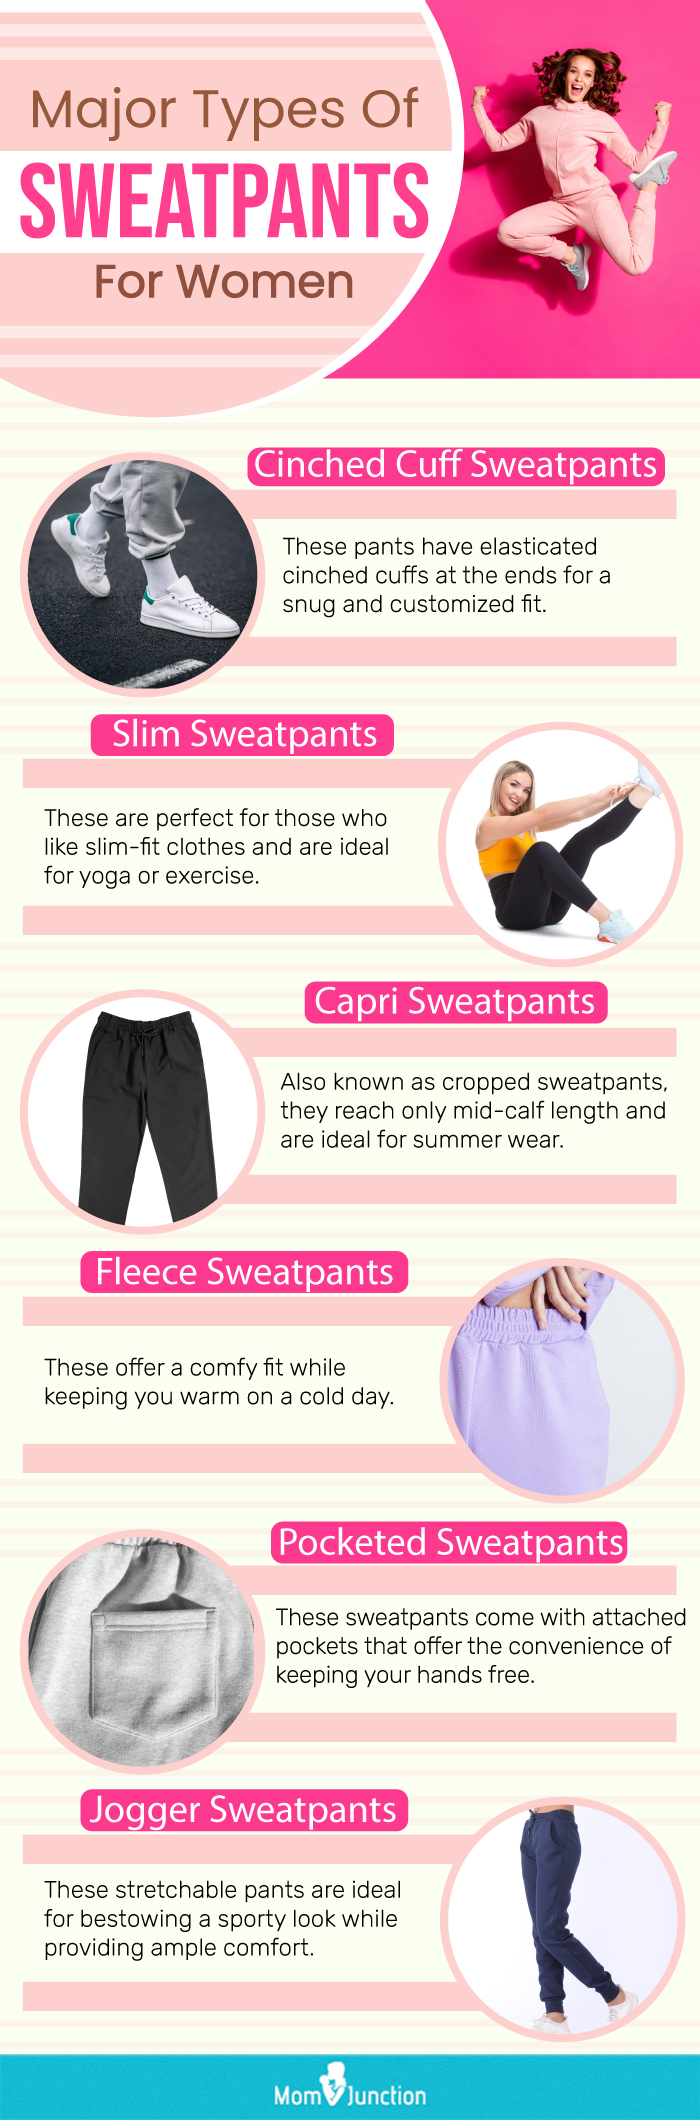 5 Different Types of Sweatpants